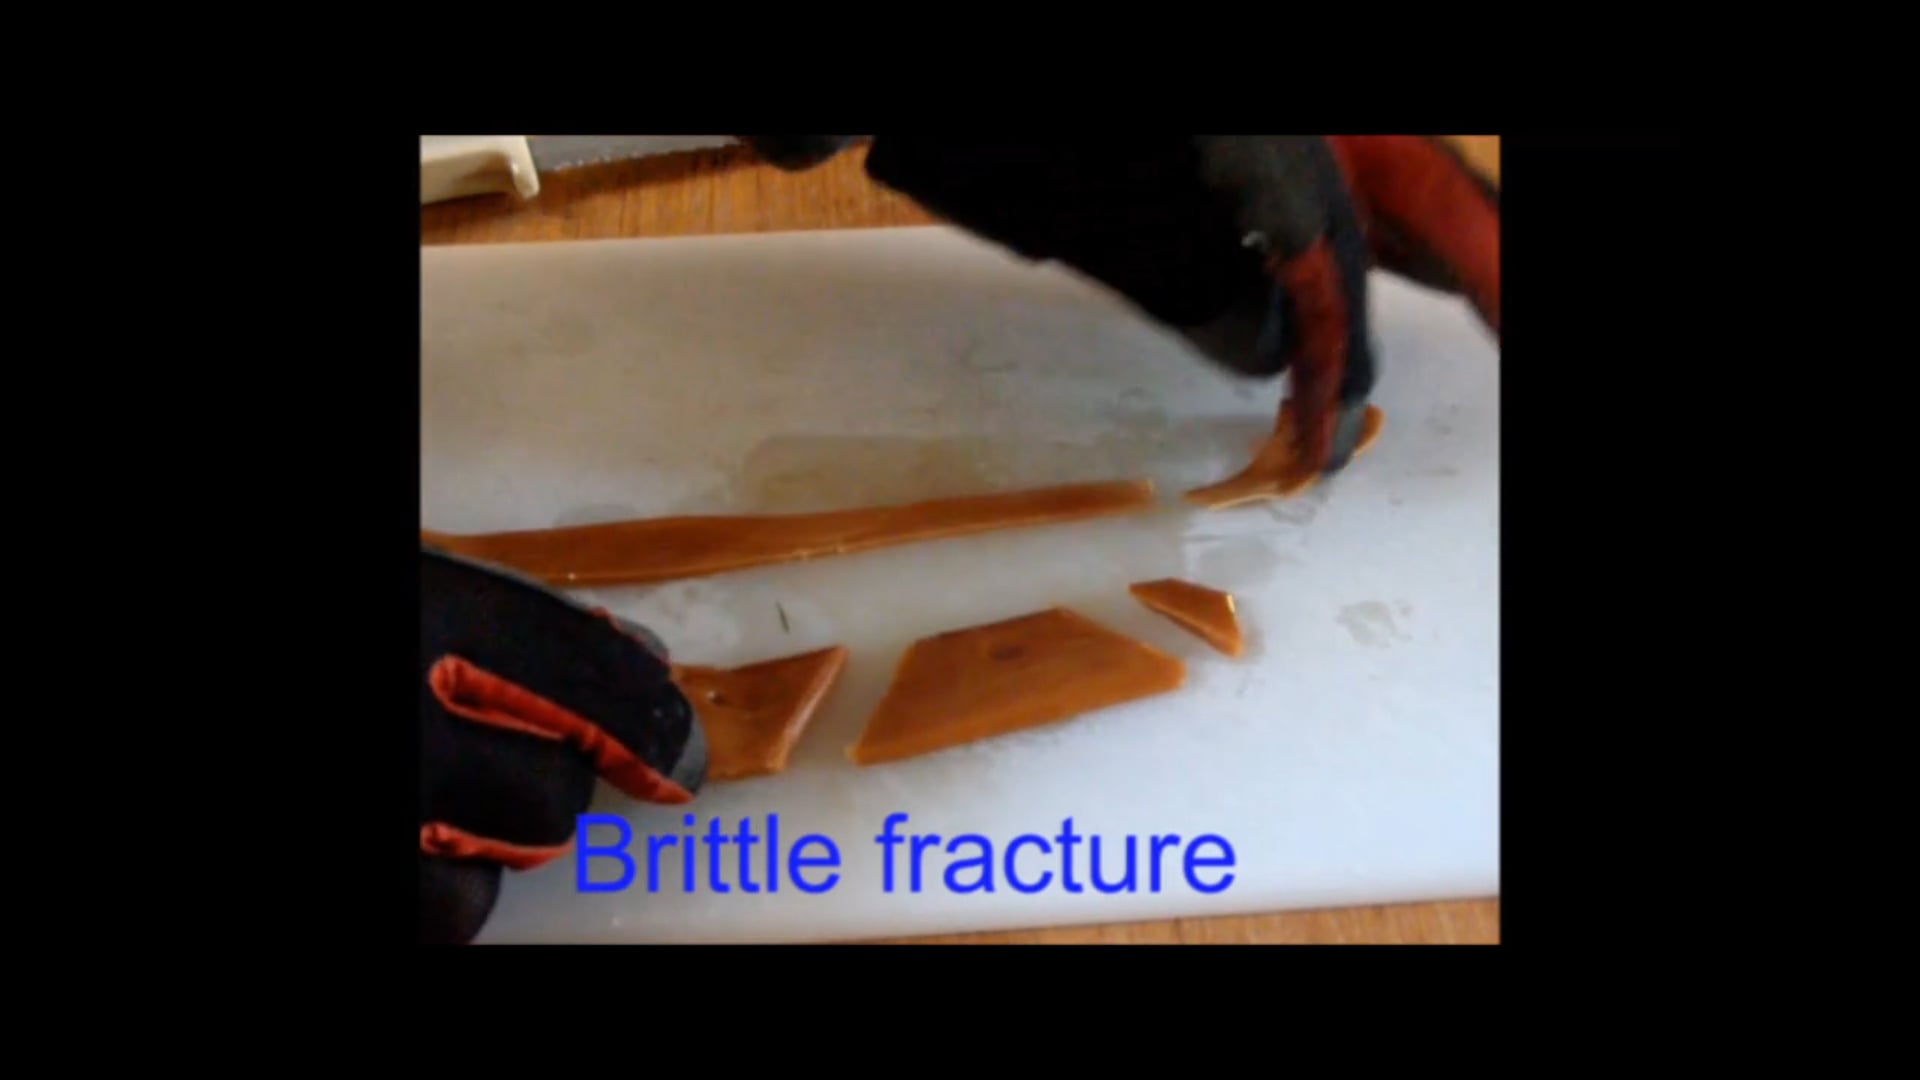 Ductile and brittle fracture of toffee (and snow is like toffee)